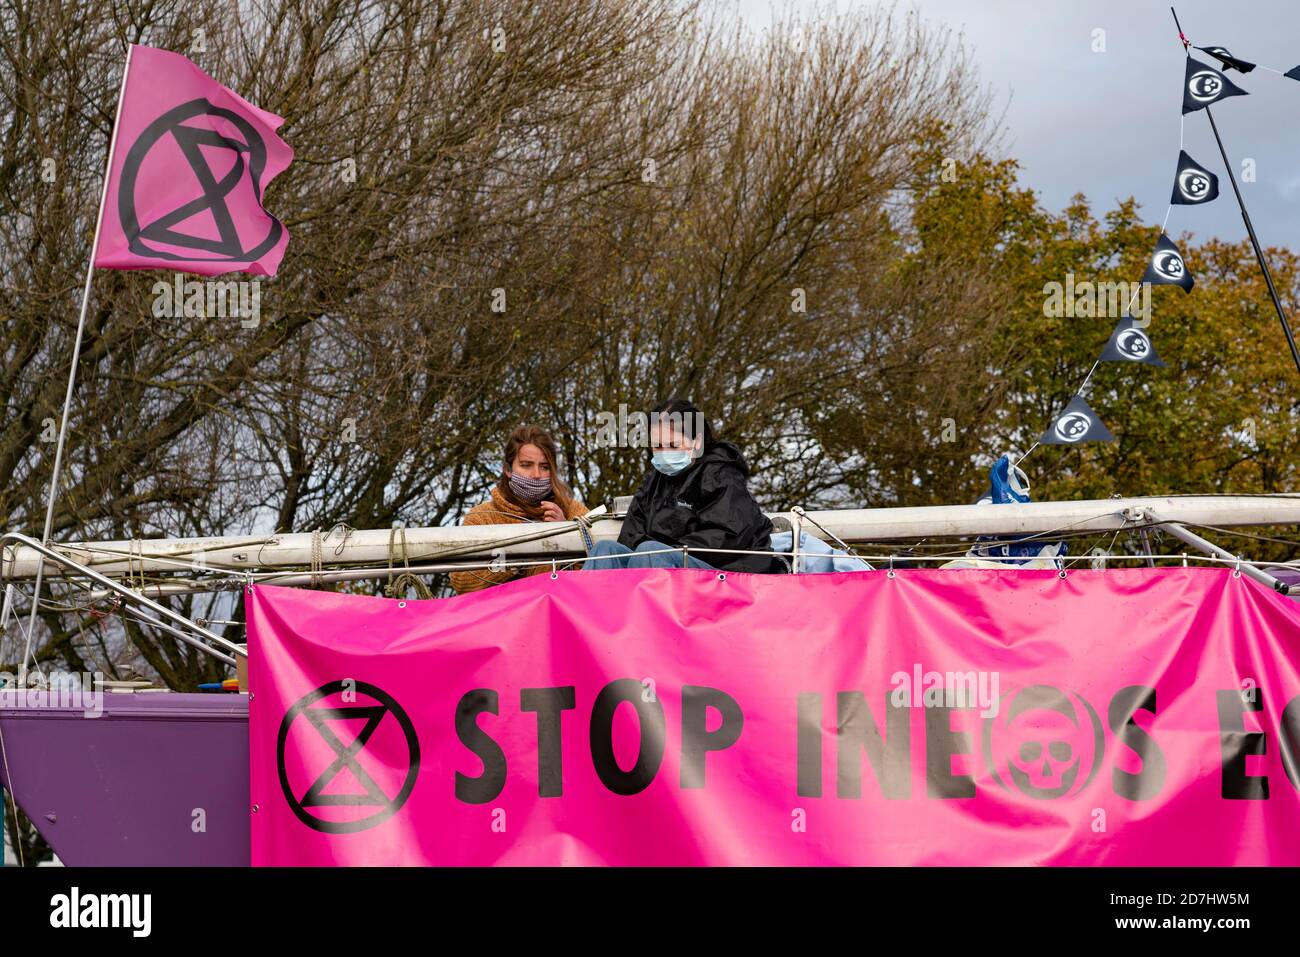 Grangemouth, Scotland, UK. 23 October 2020. Extinction Rebellion climate change protesters block entrance to INEOS headquarters at Grangemouth. Protesters have locked themselves together with chain and have parked a yacht in the road blocking access. Police have closed Inchyra Road. Iain Masterton/Alamy Live News Stock Photo